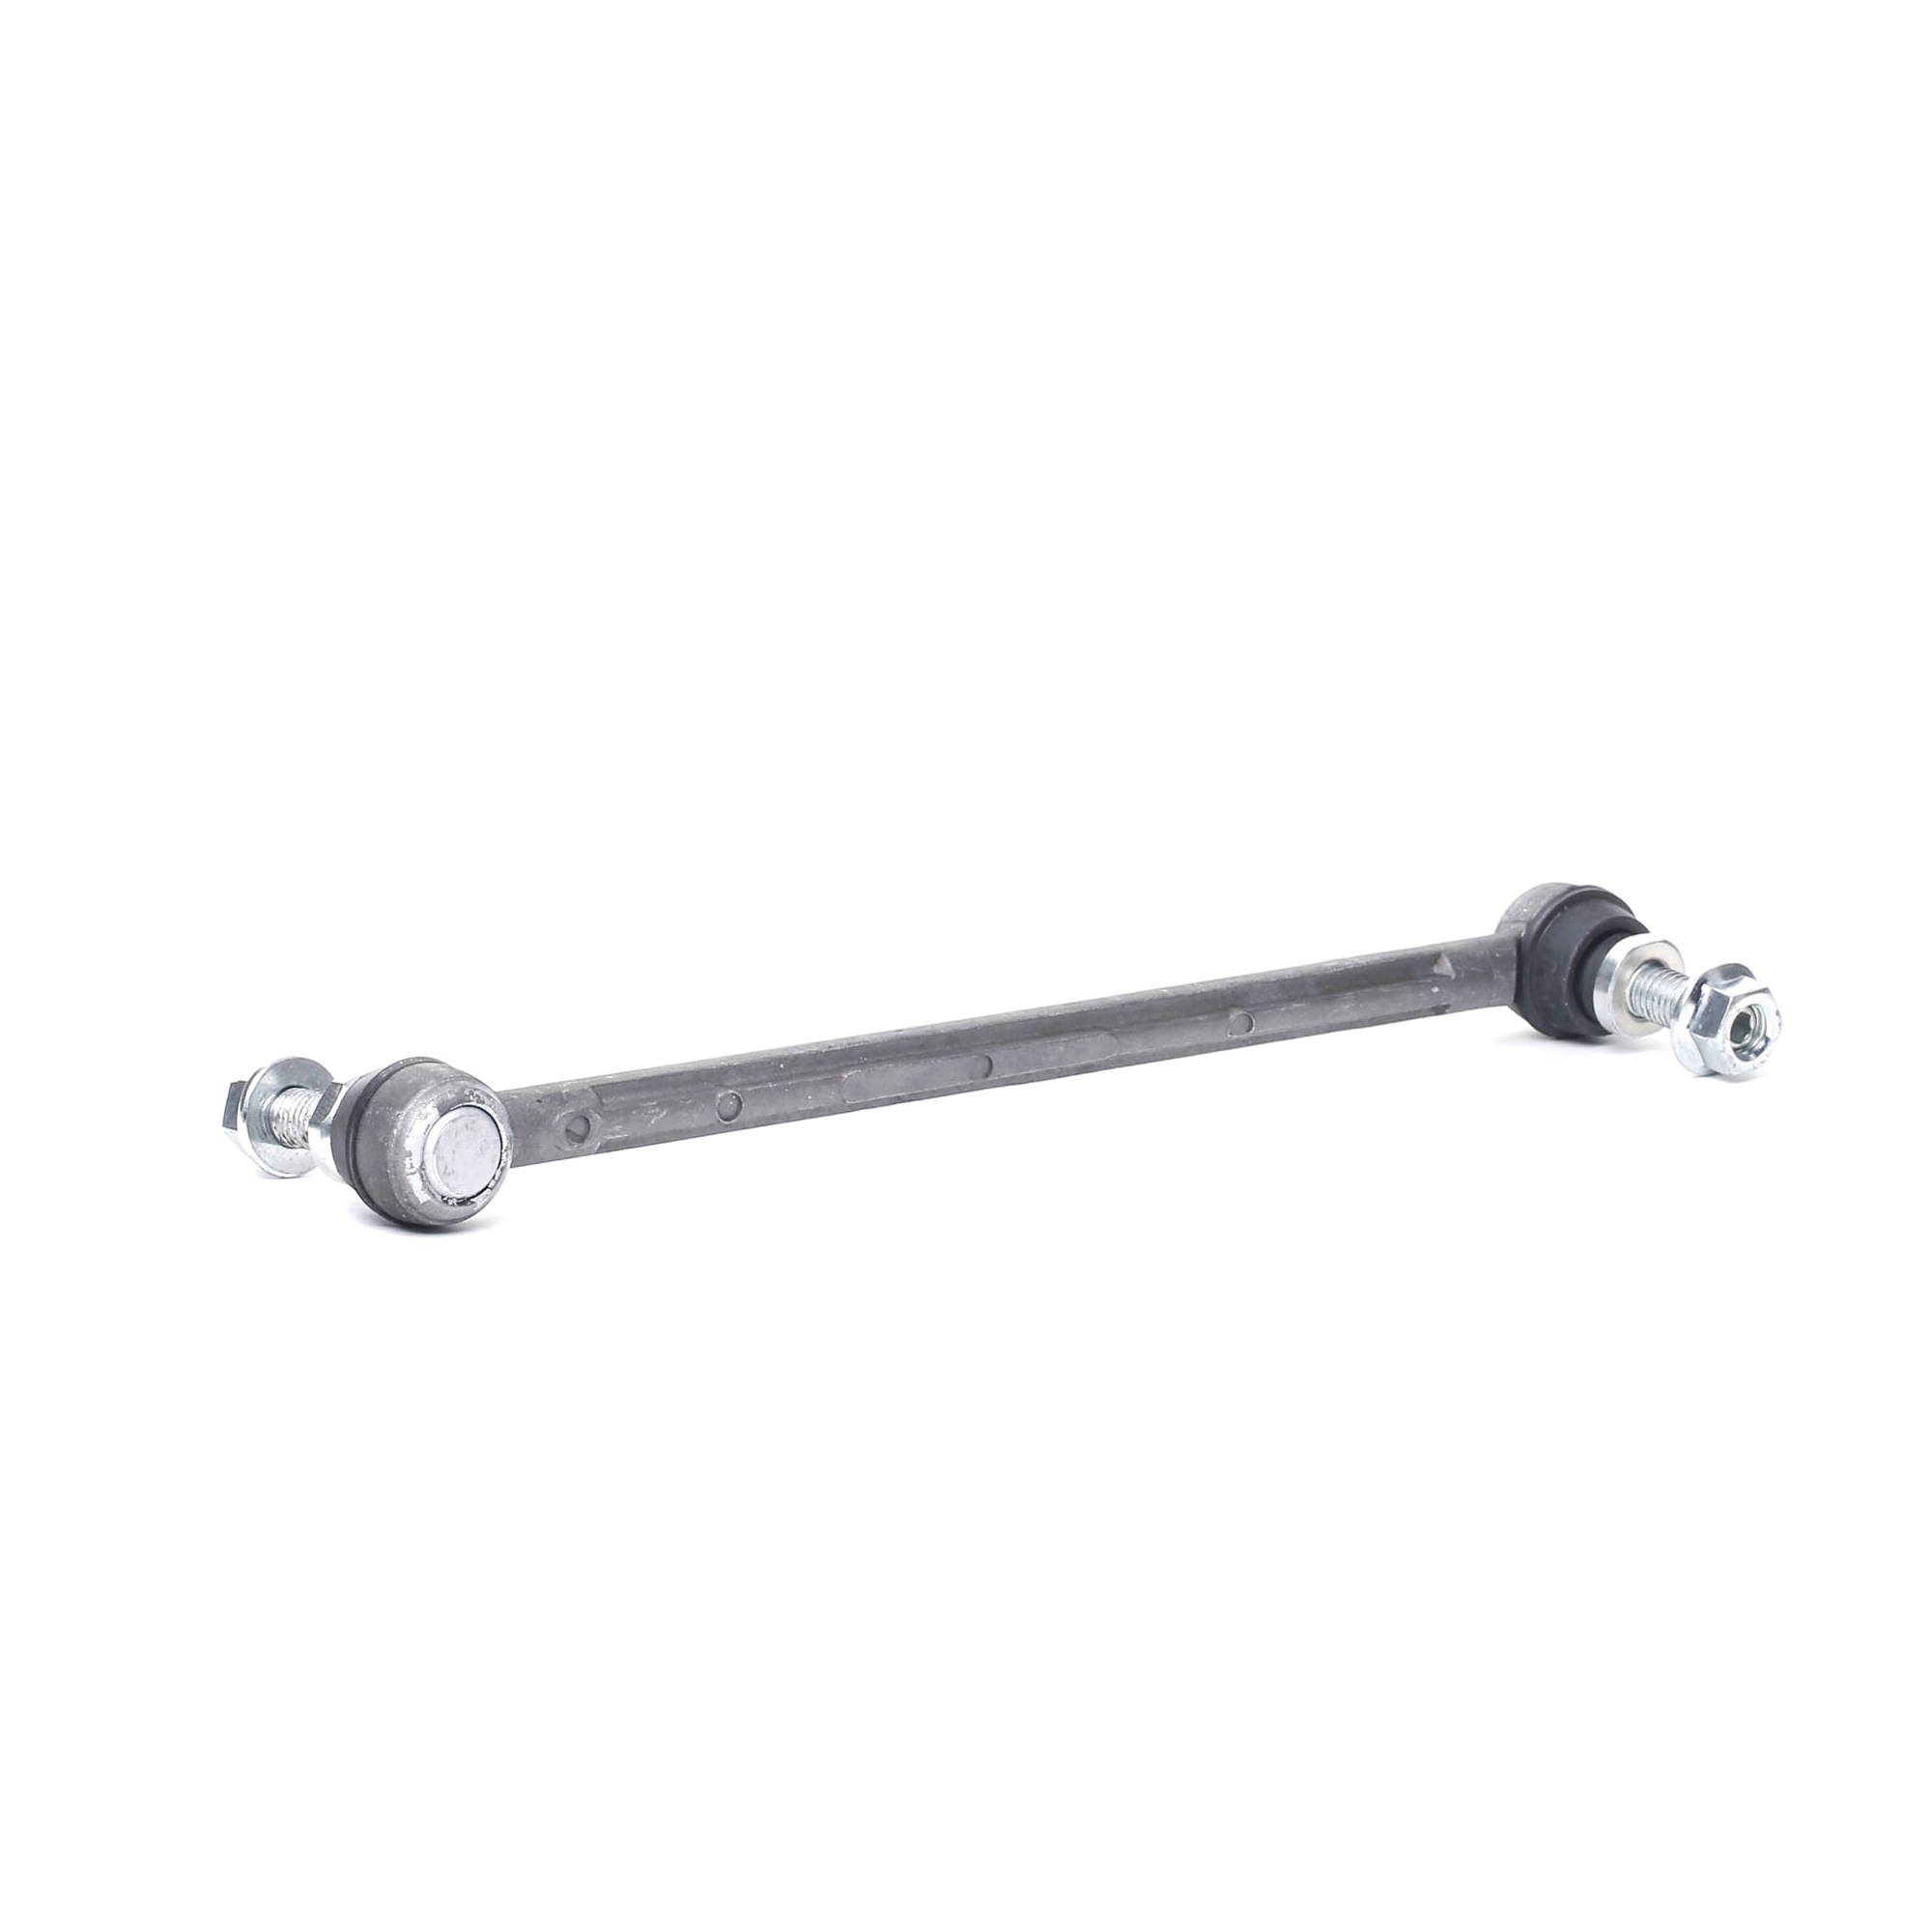 STARK SKST-0230002 Anti-roll bar link Front Axle, both sides, 237mm, M10x1.5 , with accessories, Aluminium